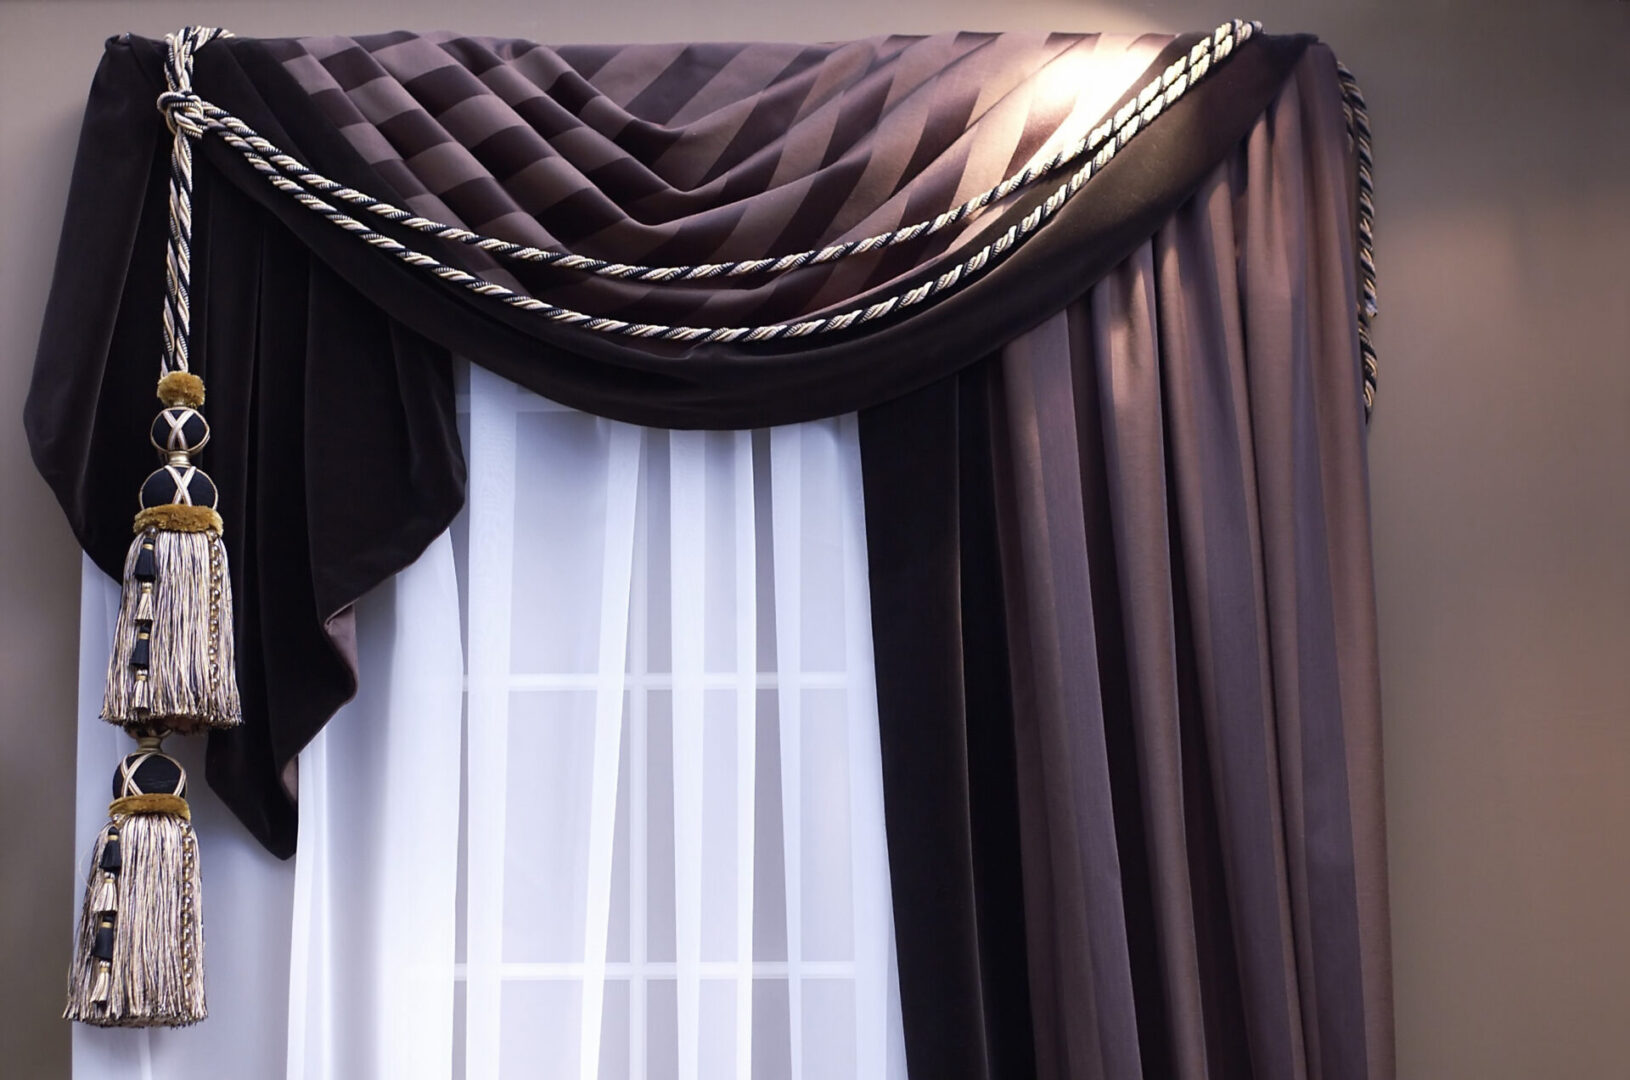 A window with curtains and drapes in the corner.